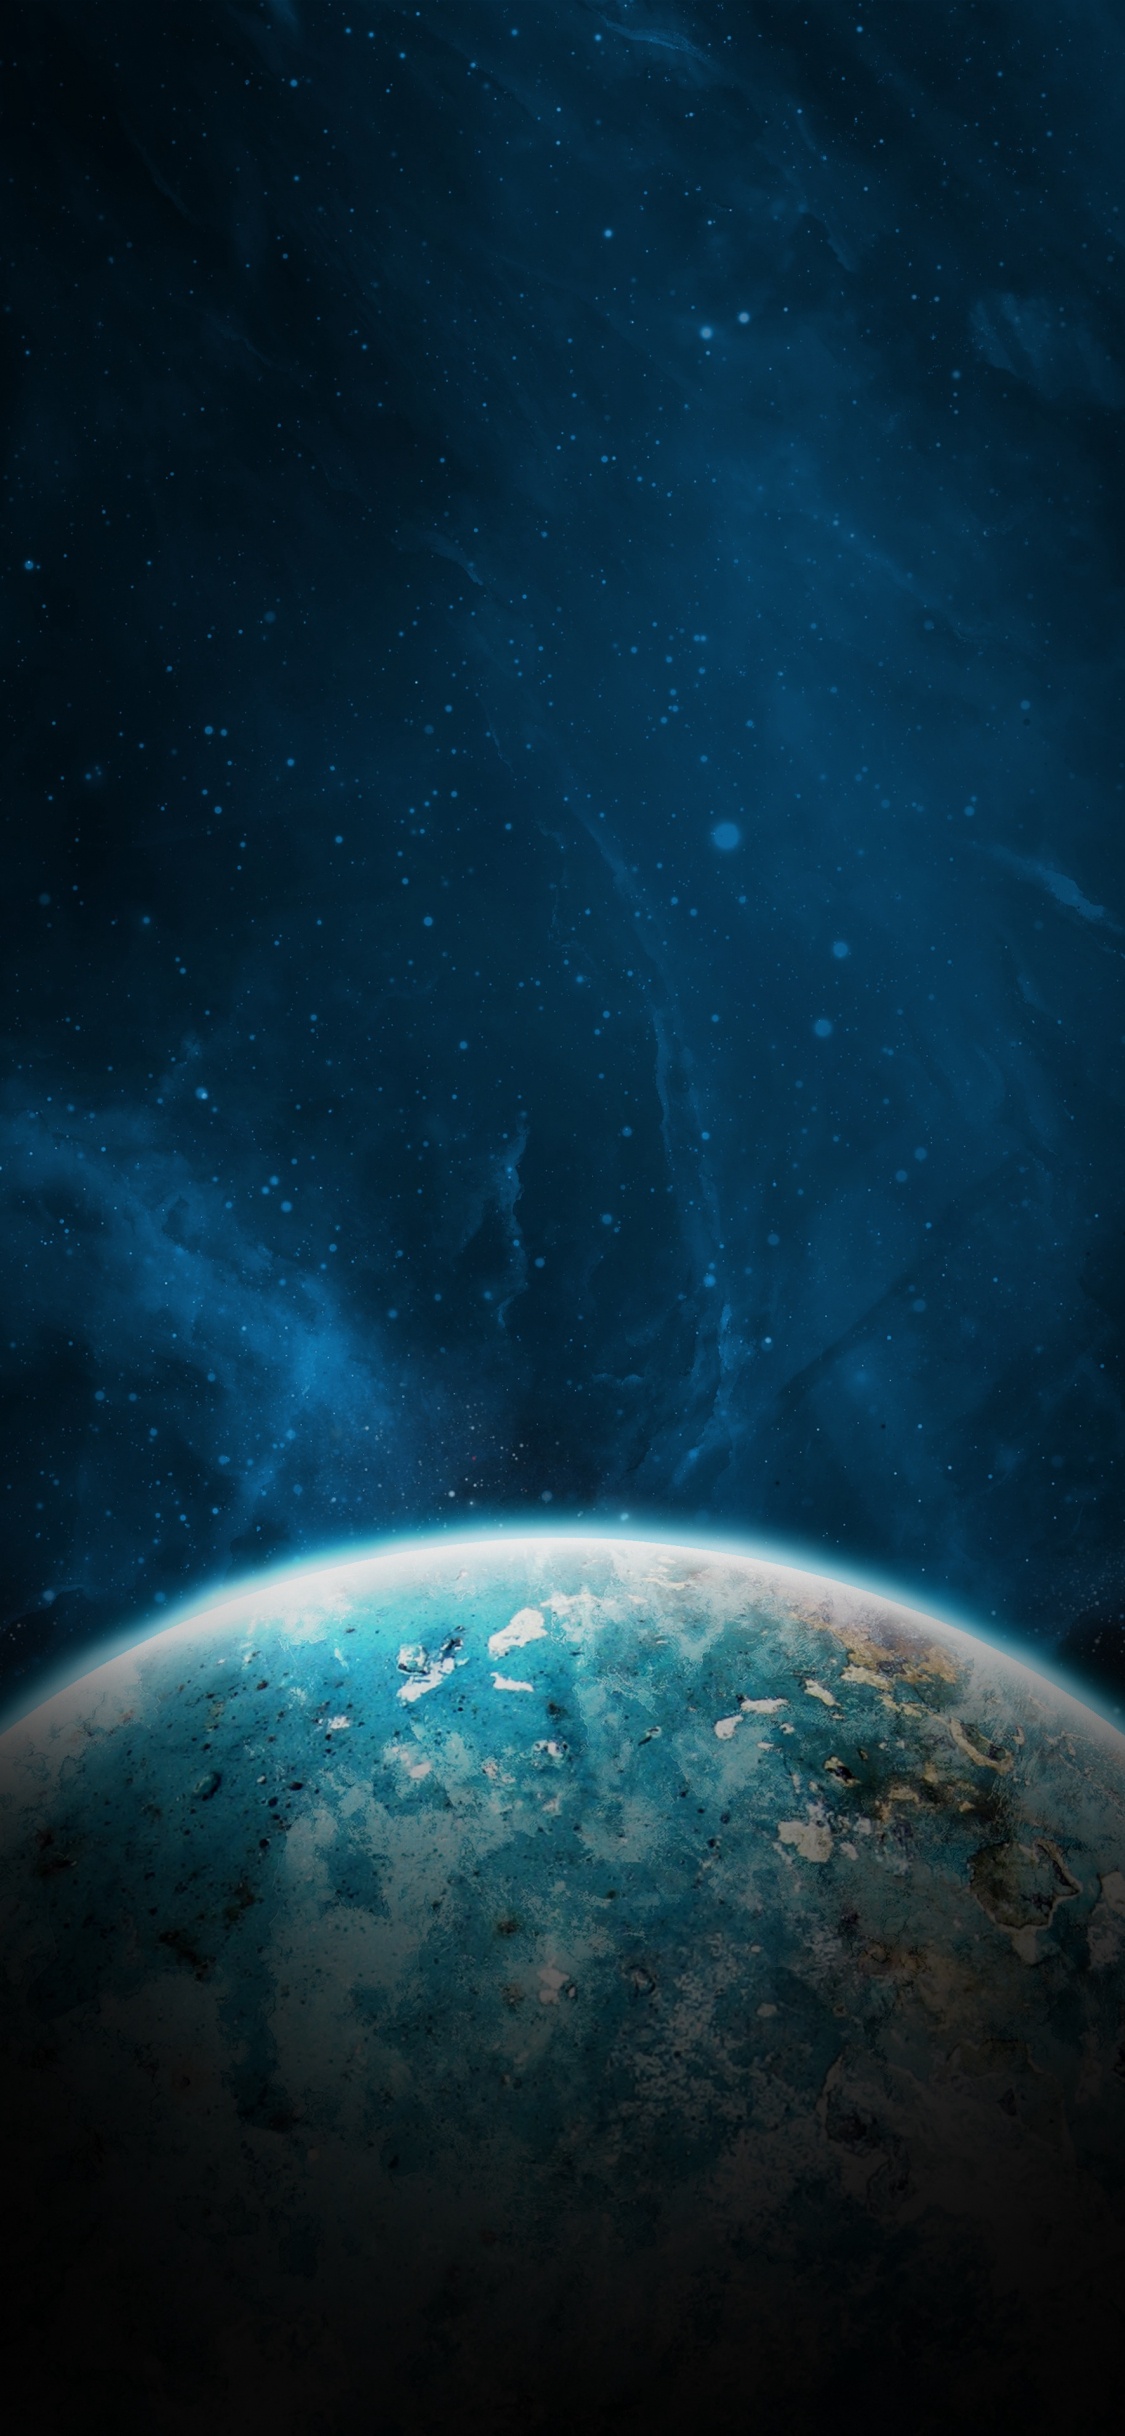 Blue and Black Planet With Stars. Wallpaper in 1125x2436 Resolution